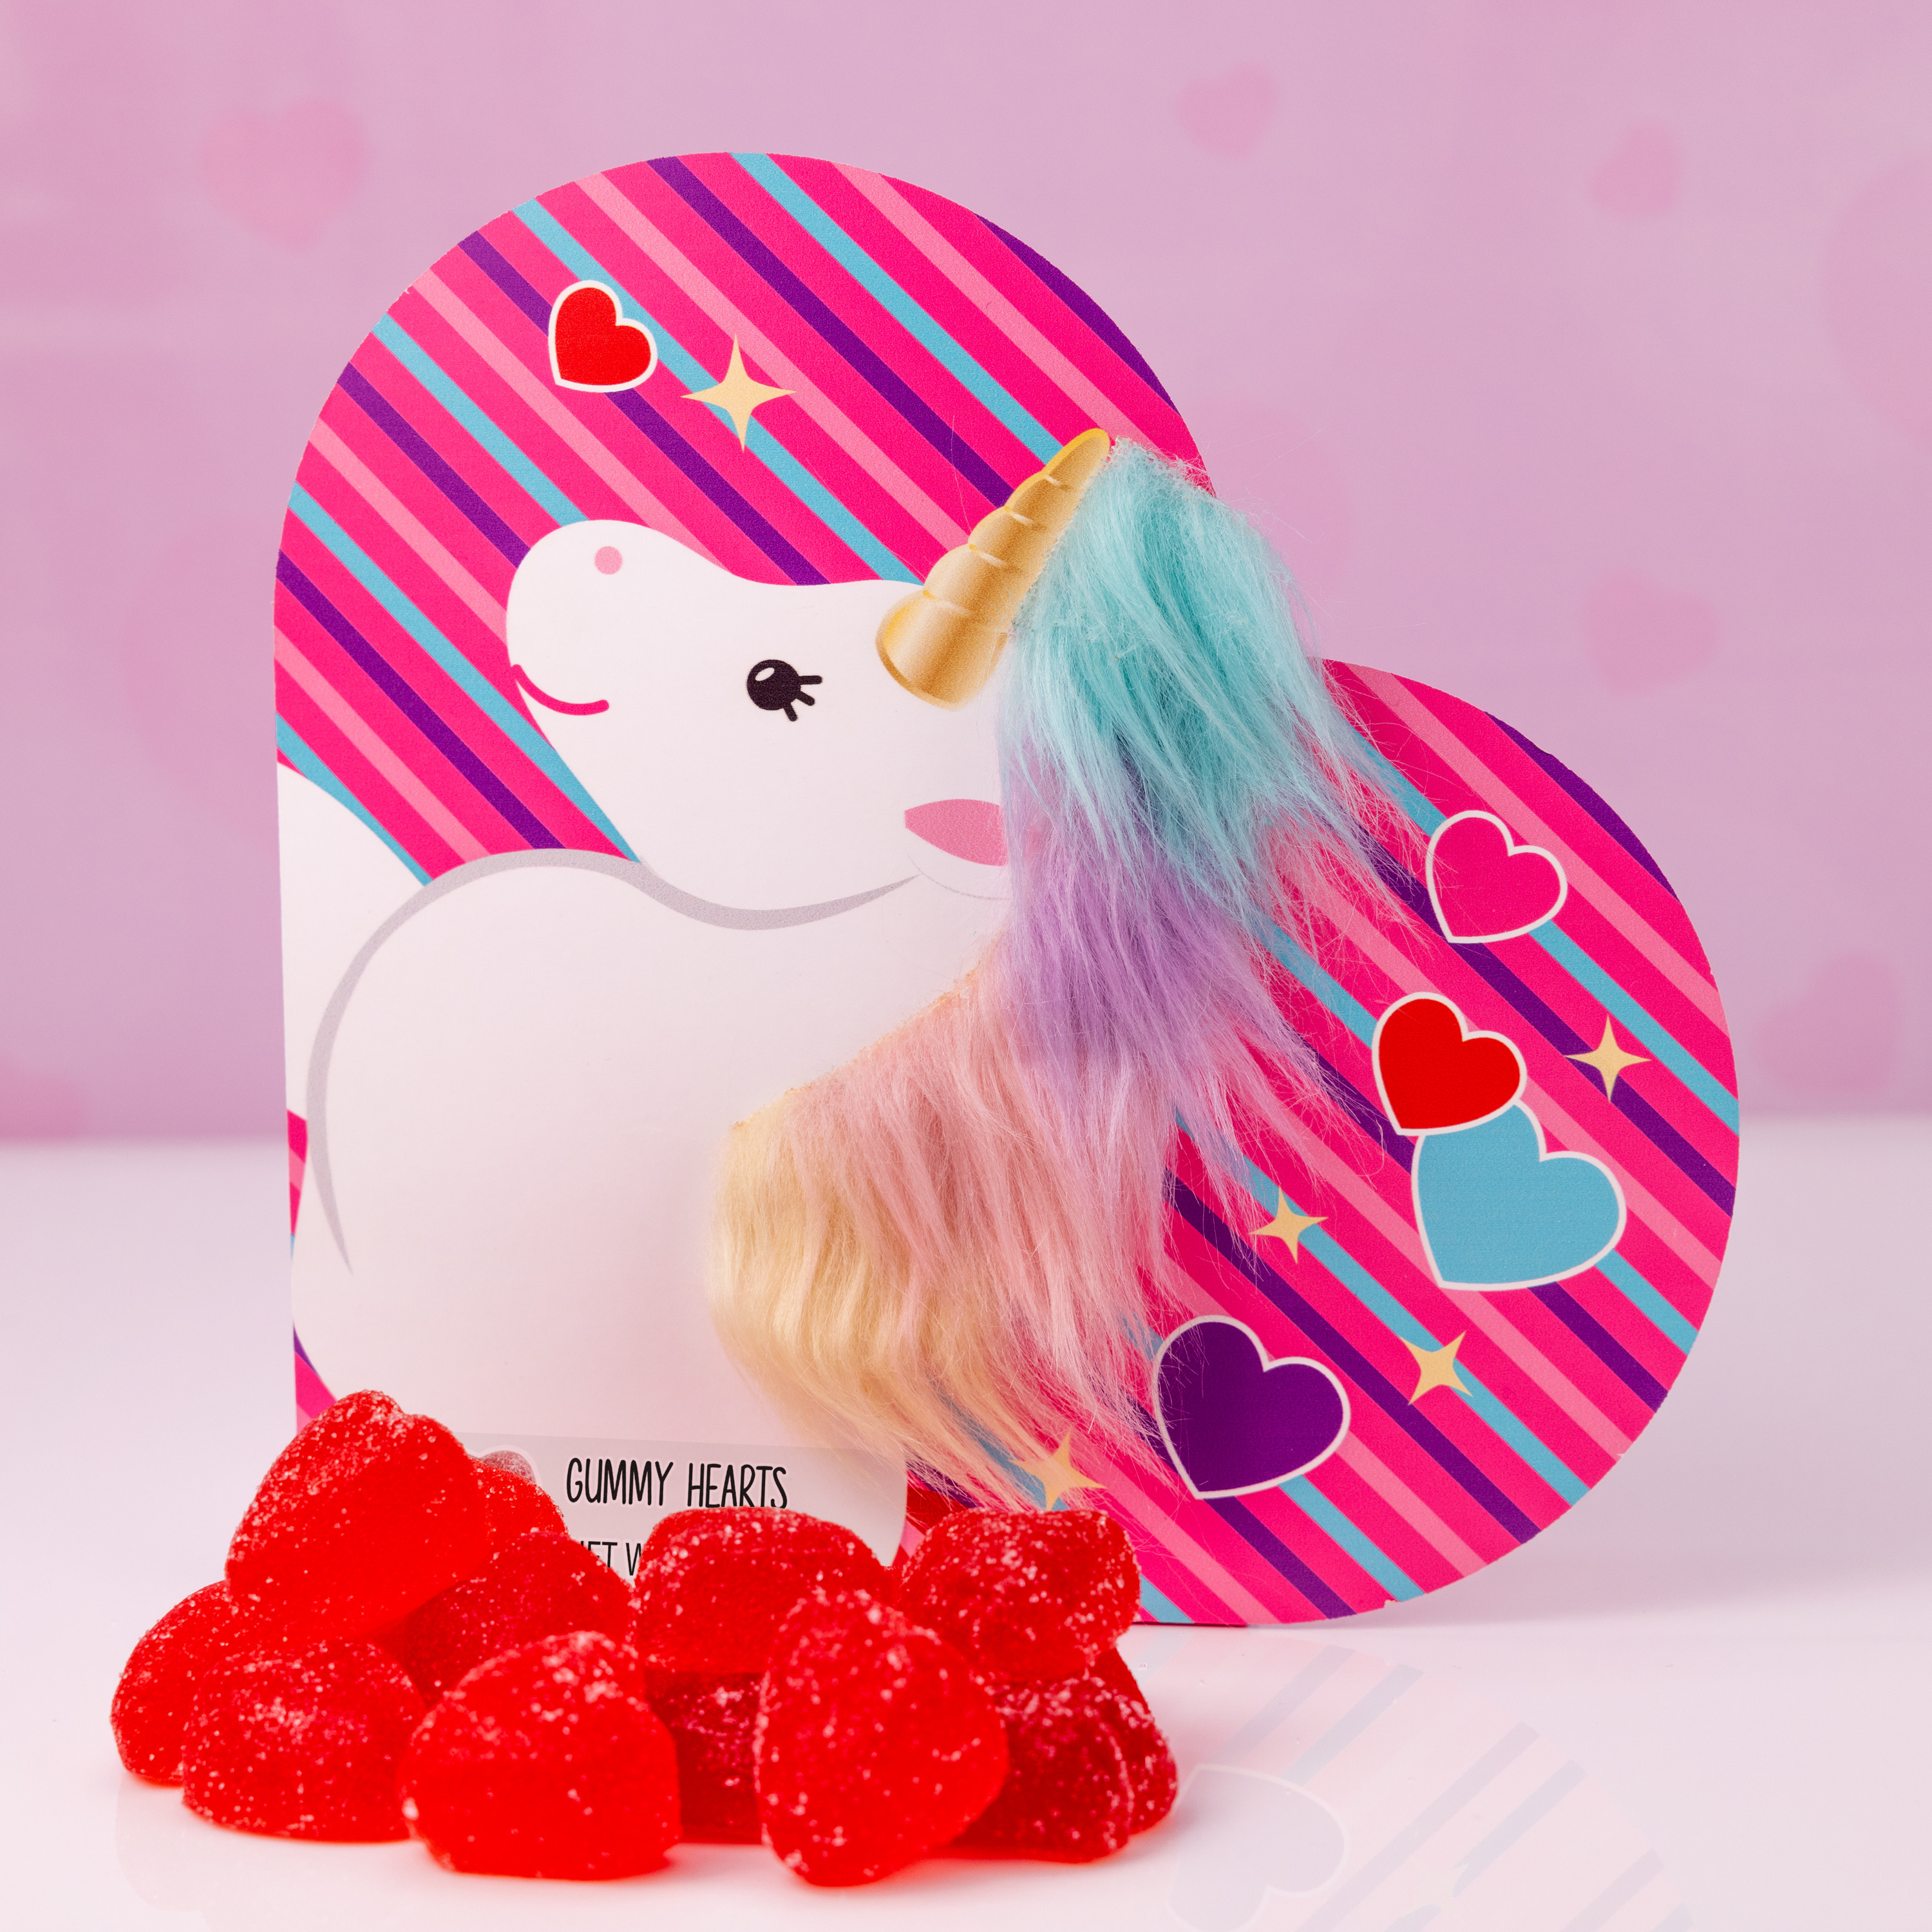 Galerie Unicorn Faux Heart Box with Gummies, 6.35 oz - image 4 of 6